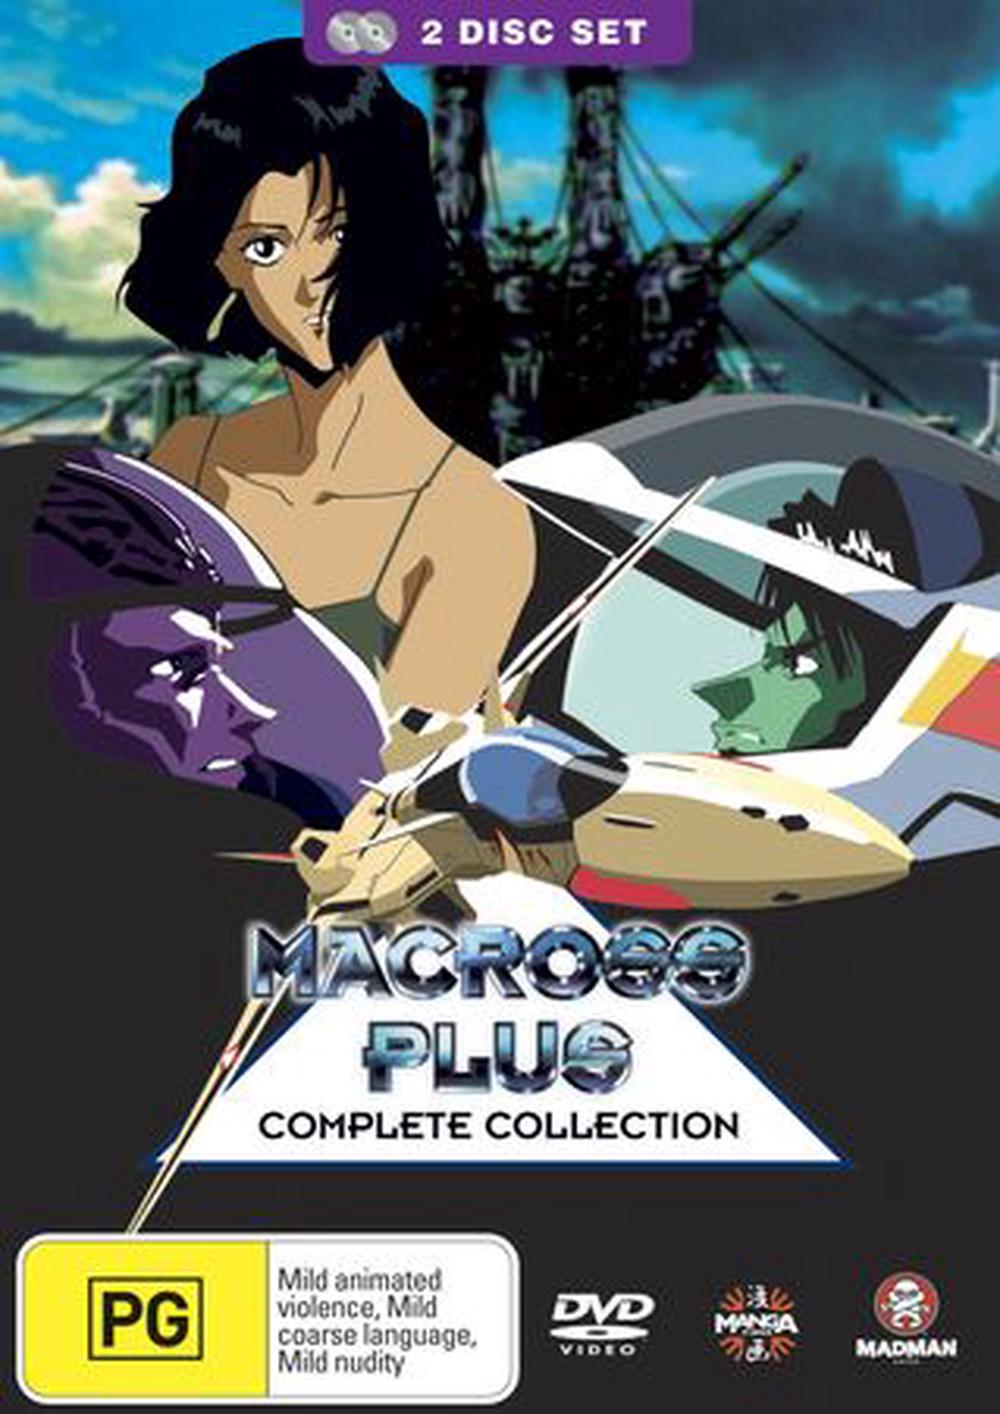 Macross Plus Complete Collection 2 Disc Set Dvd Buy Online At The Nile